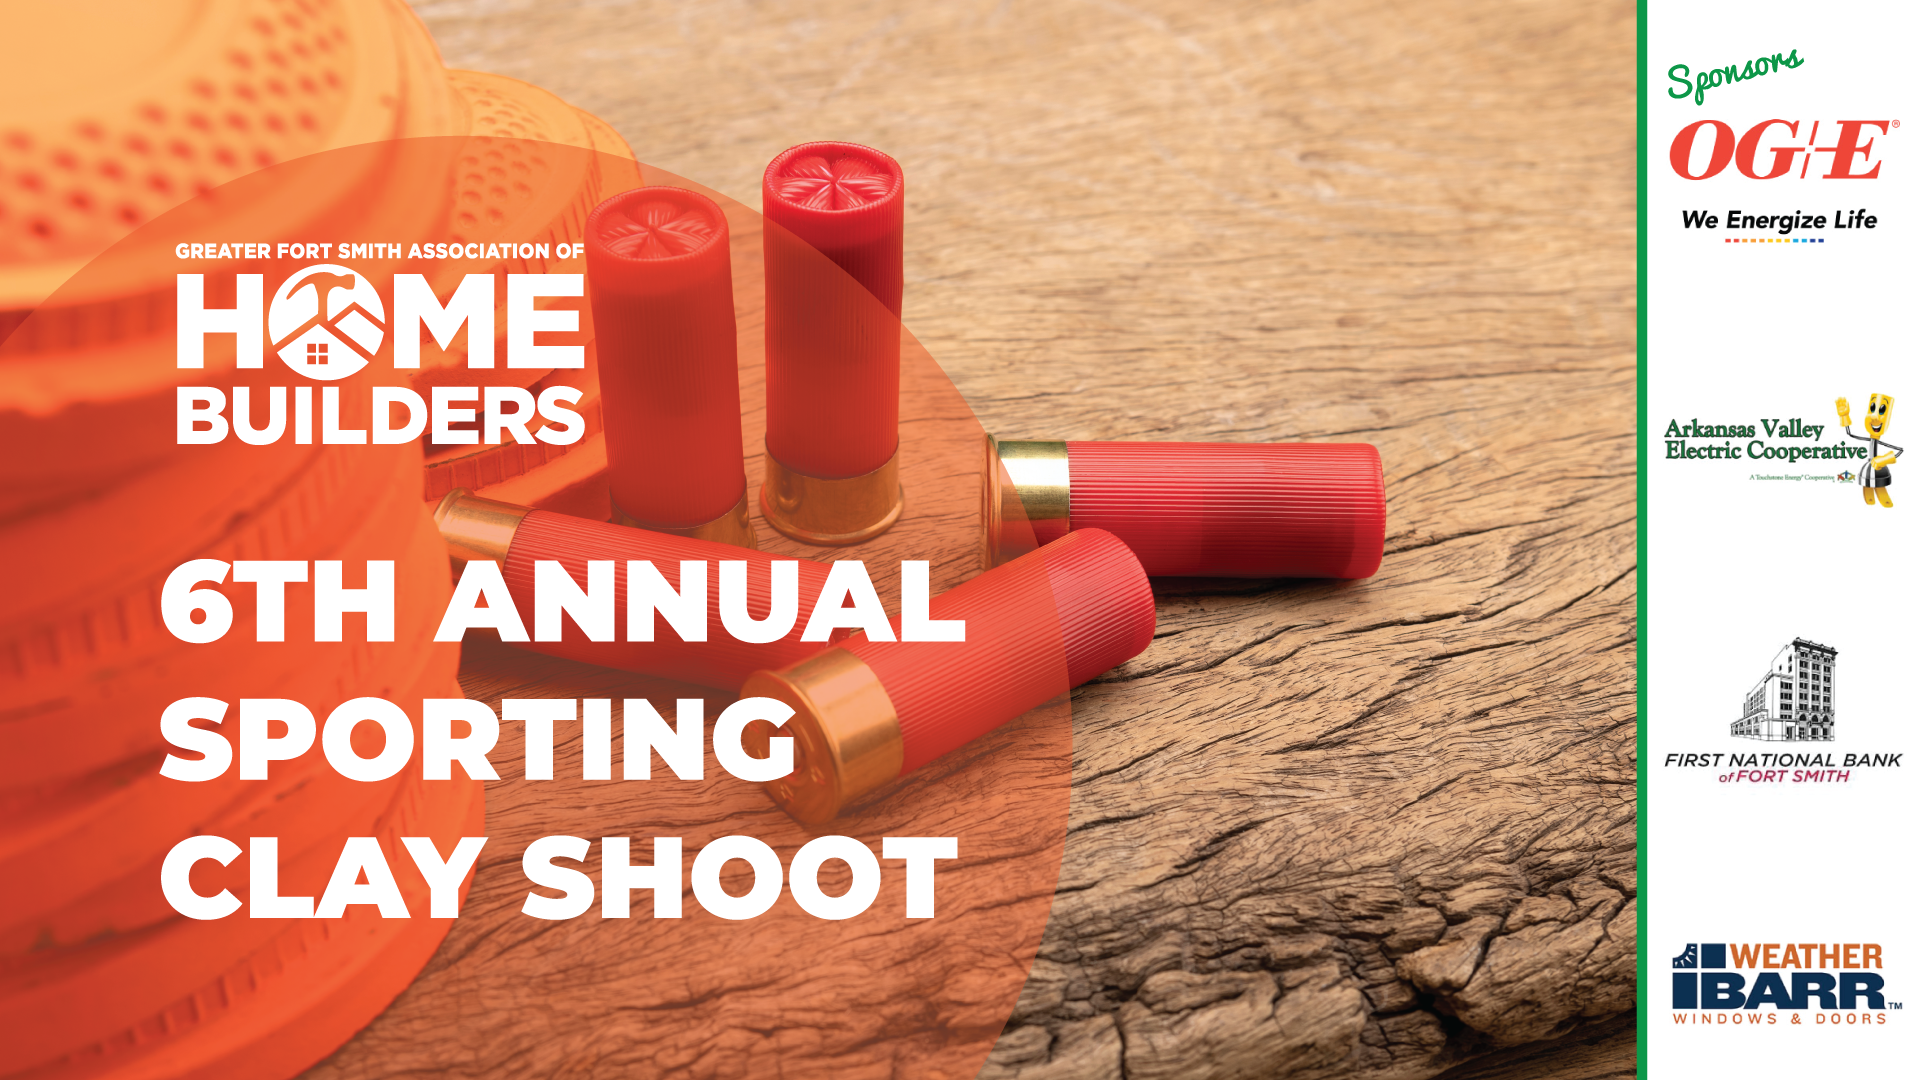 6th Annual Sporting Clay Shoot